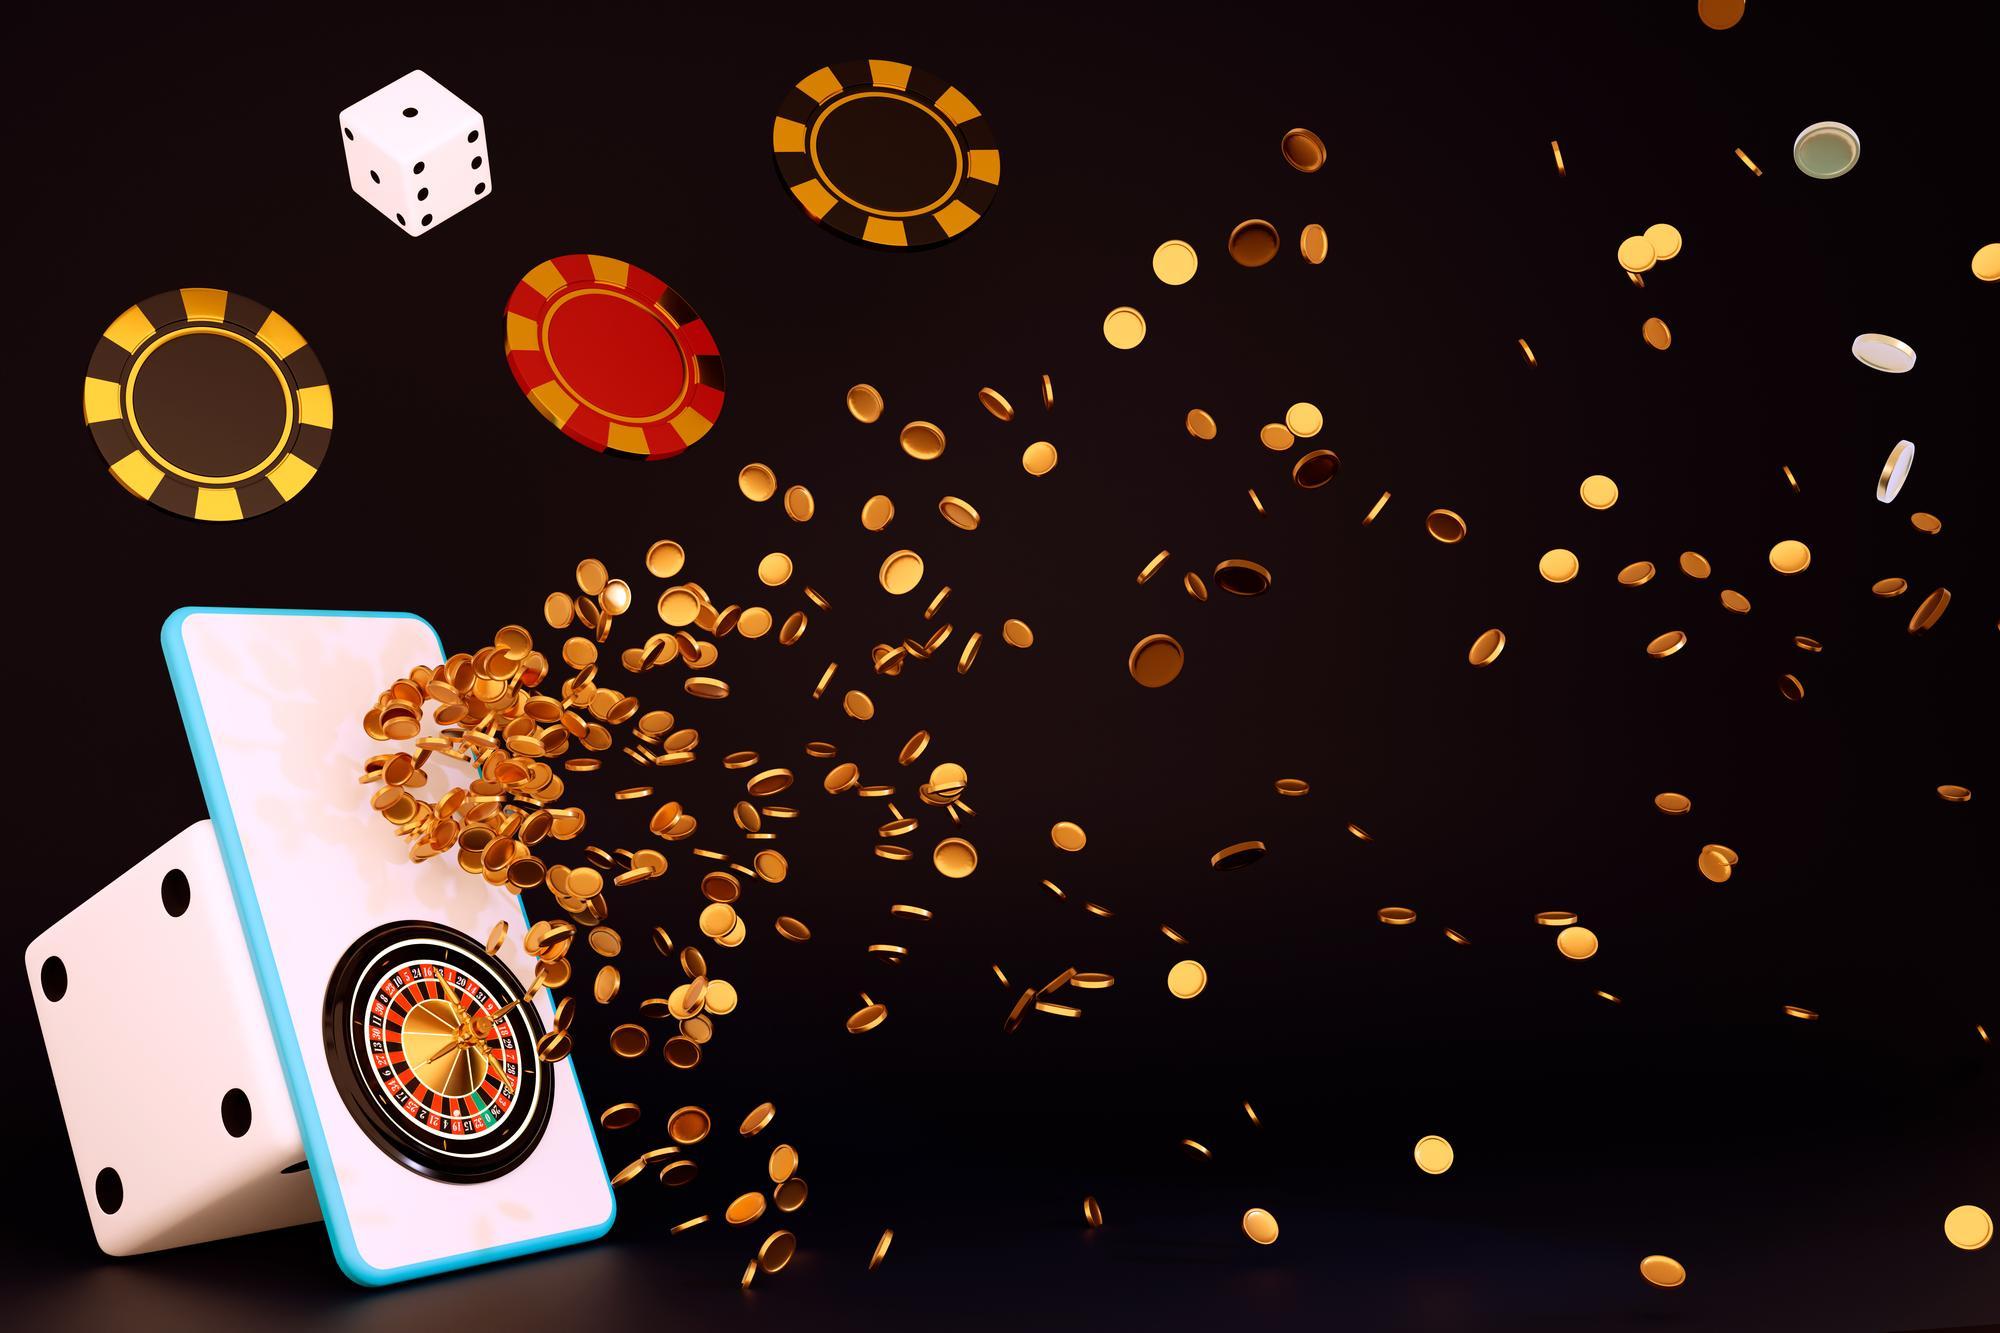 3d-phone-with-roulette-wheel-screen-mobile-phone-flying-coins-chips-dices